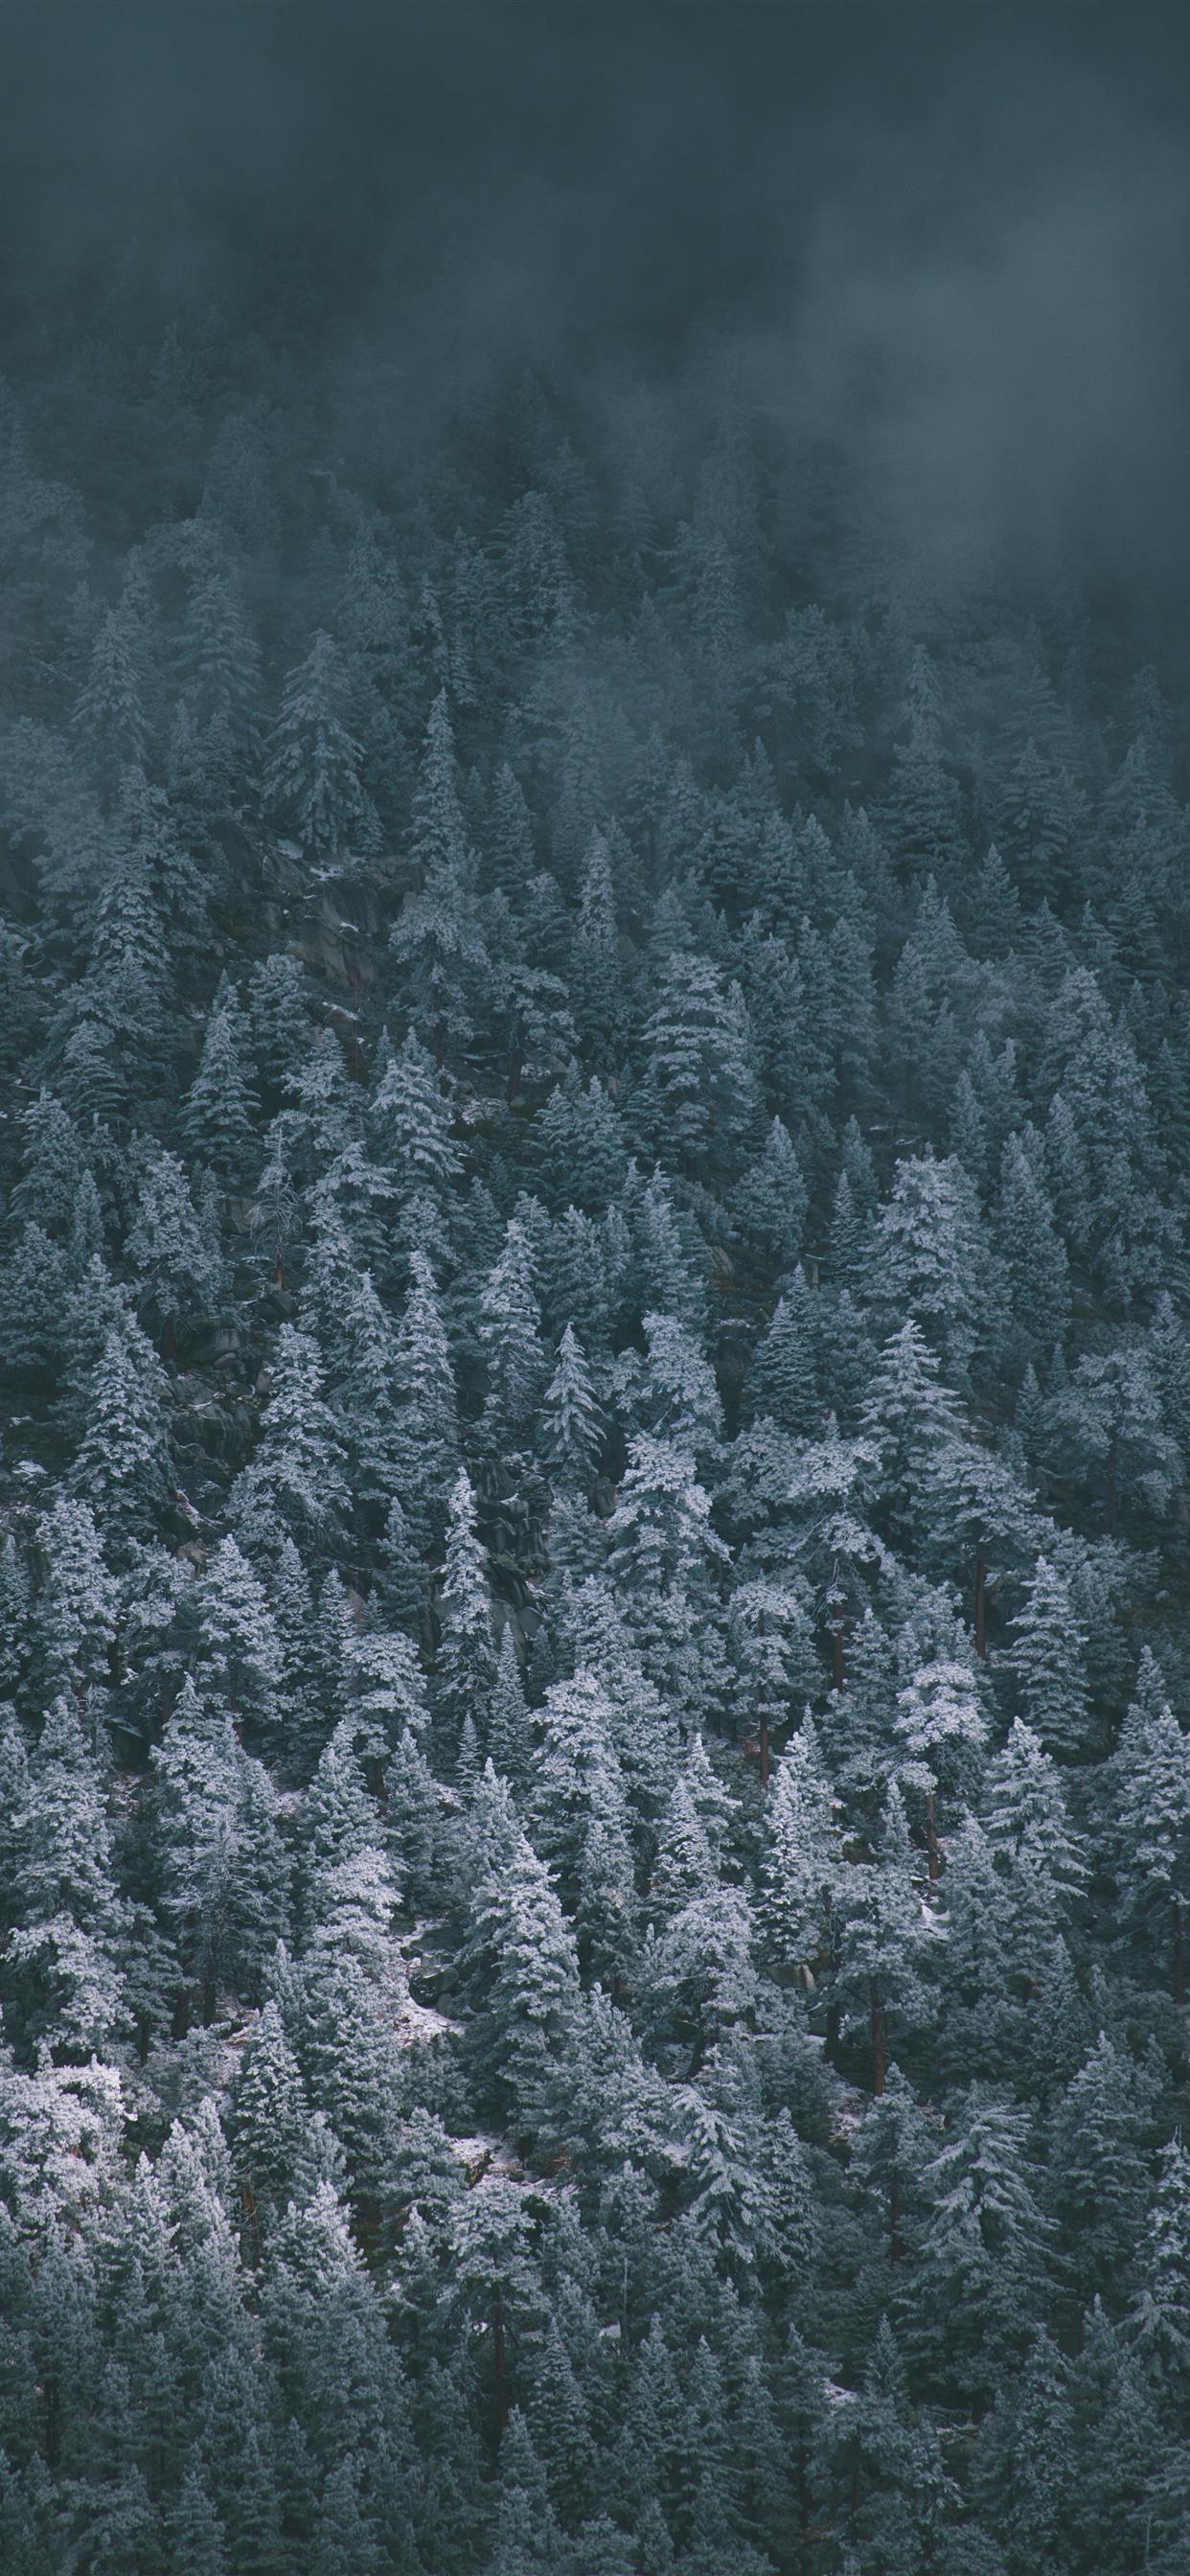 Snow Covered Pines iPhone Wallpaper Free Download